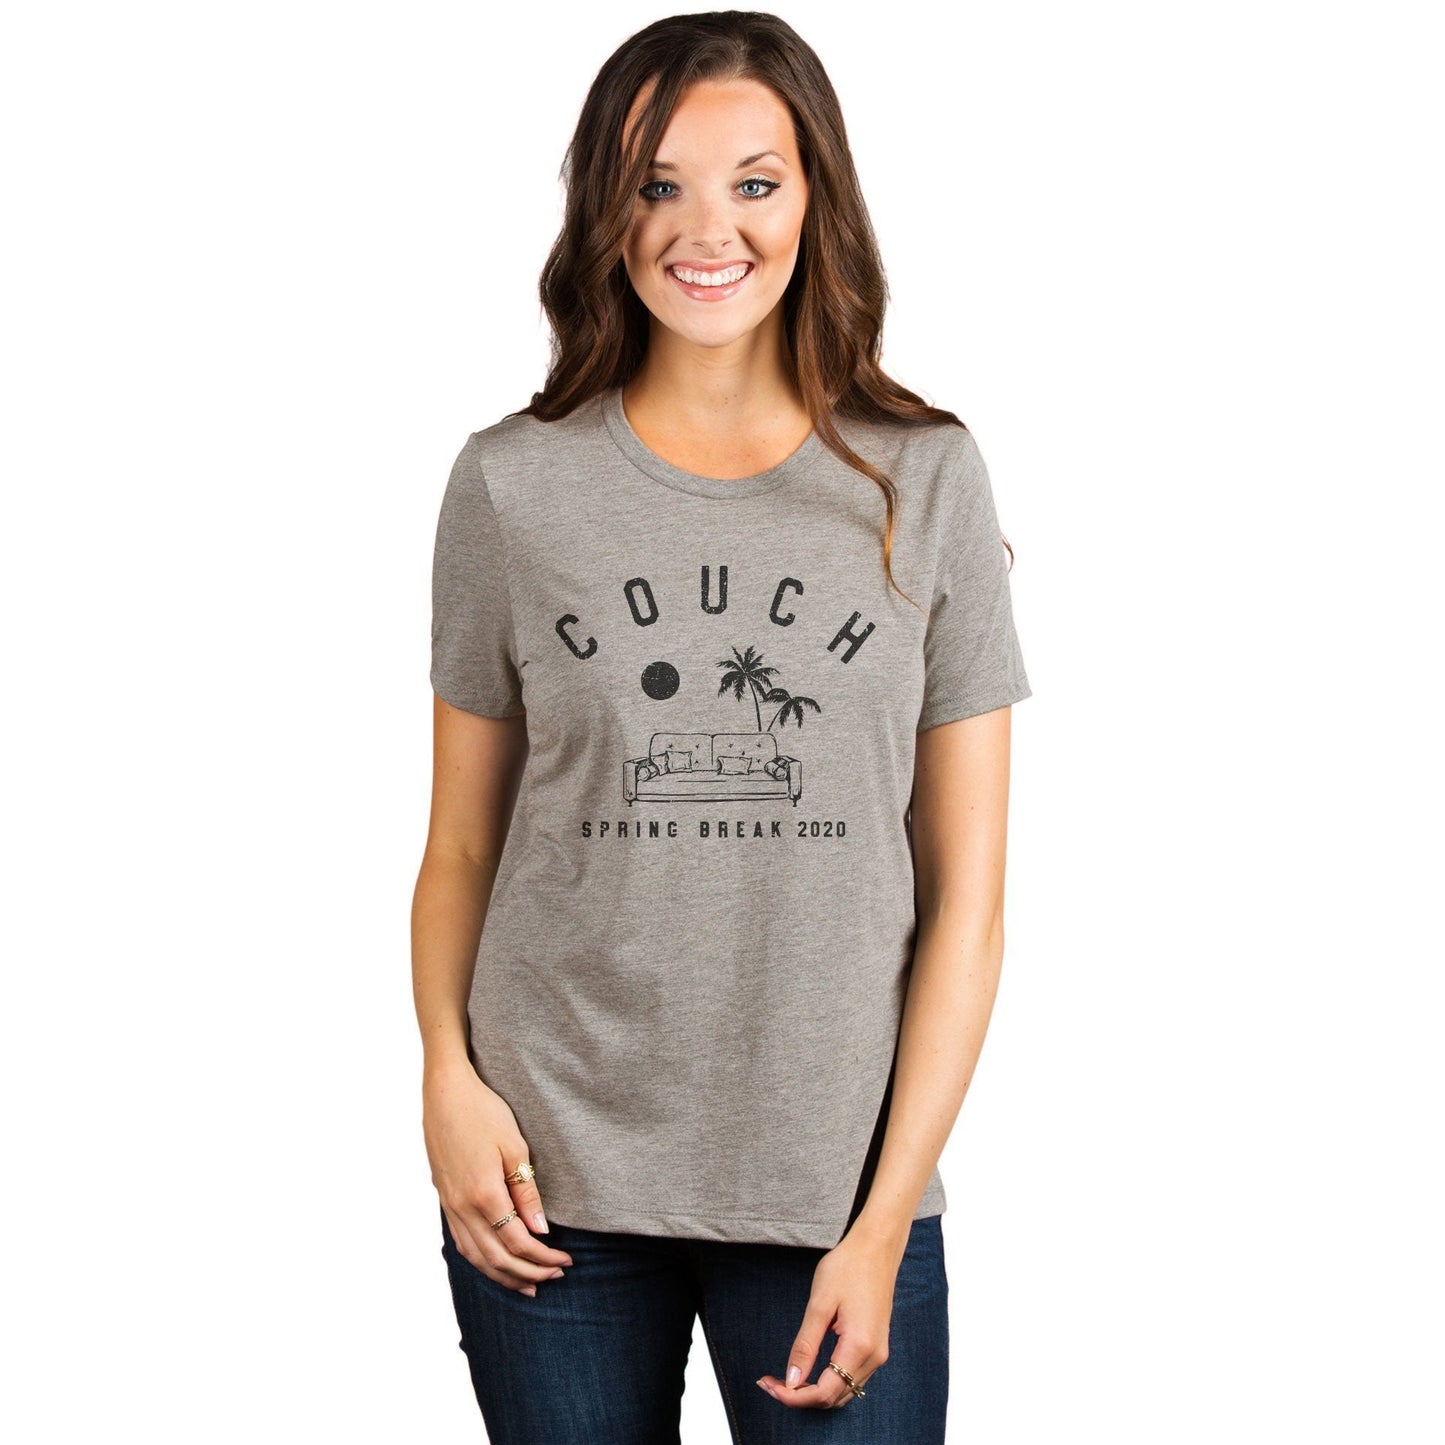 Couch Spring Break Women's Relaxed Crewneck T-Shirt Top Tee Charcoal Model
